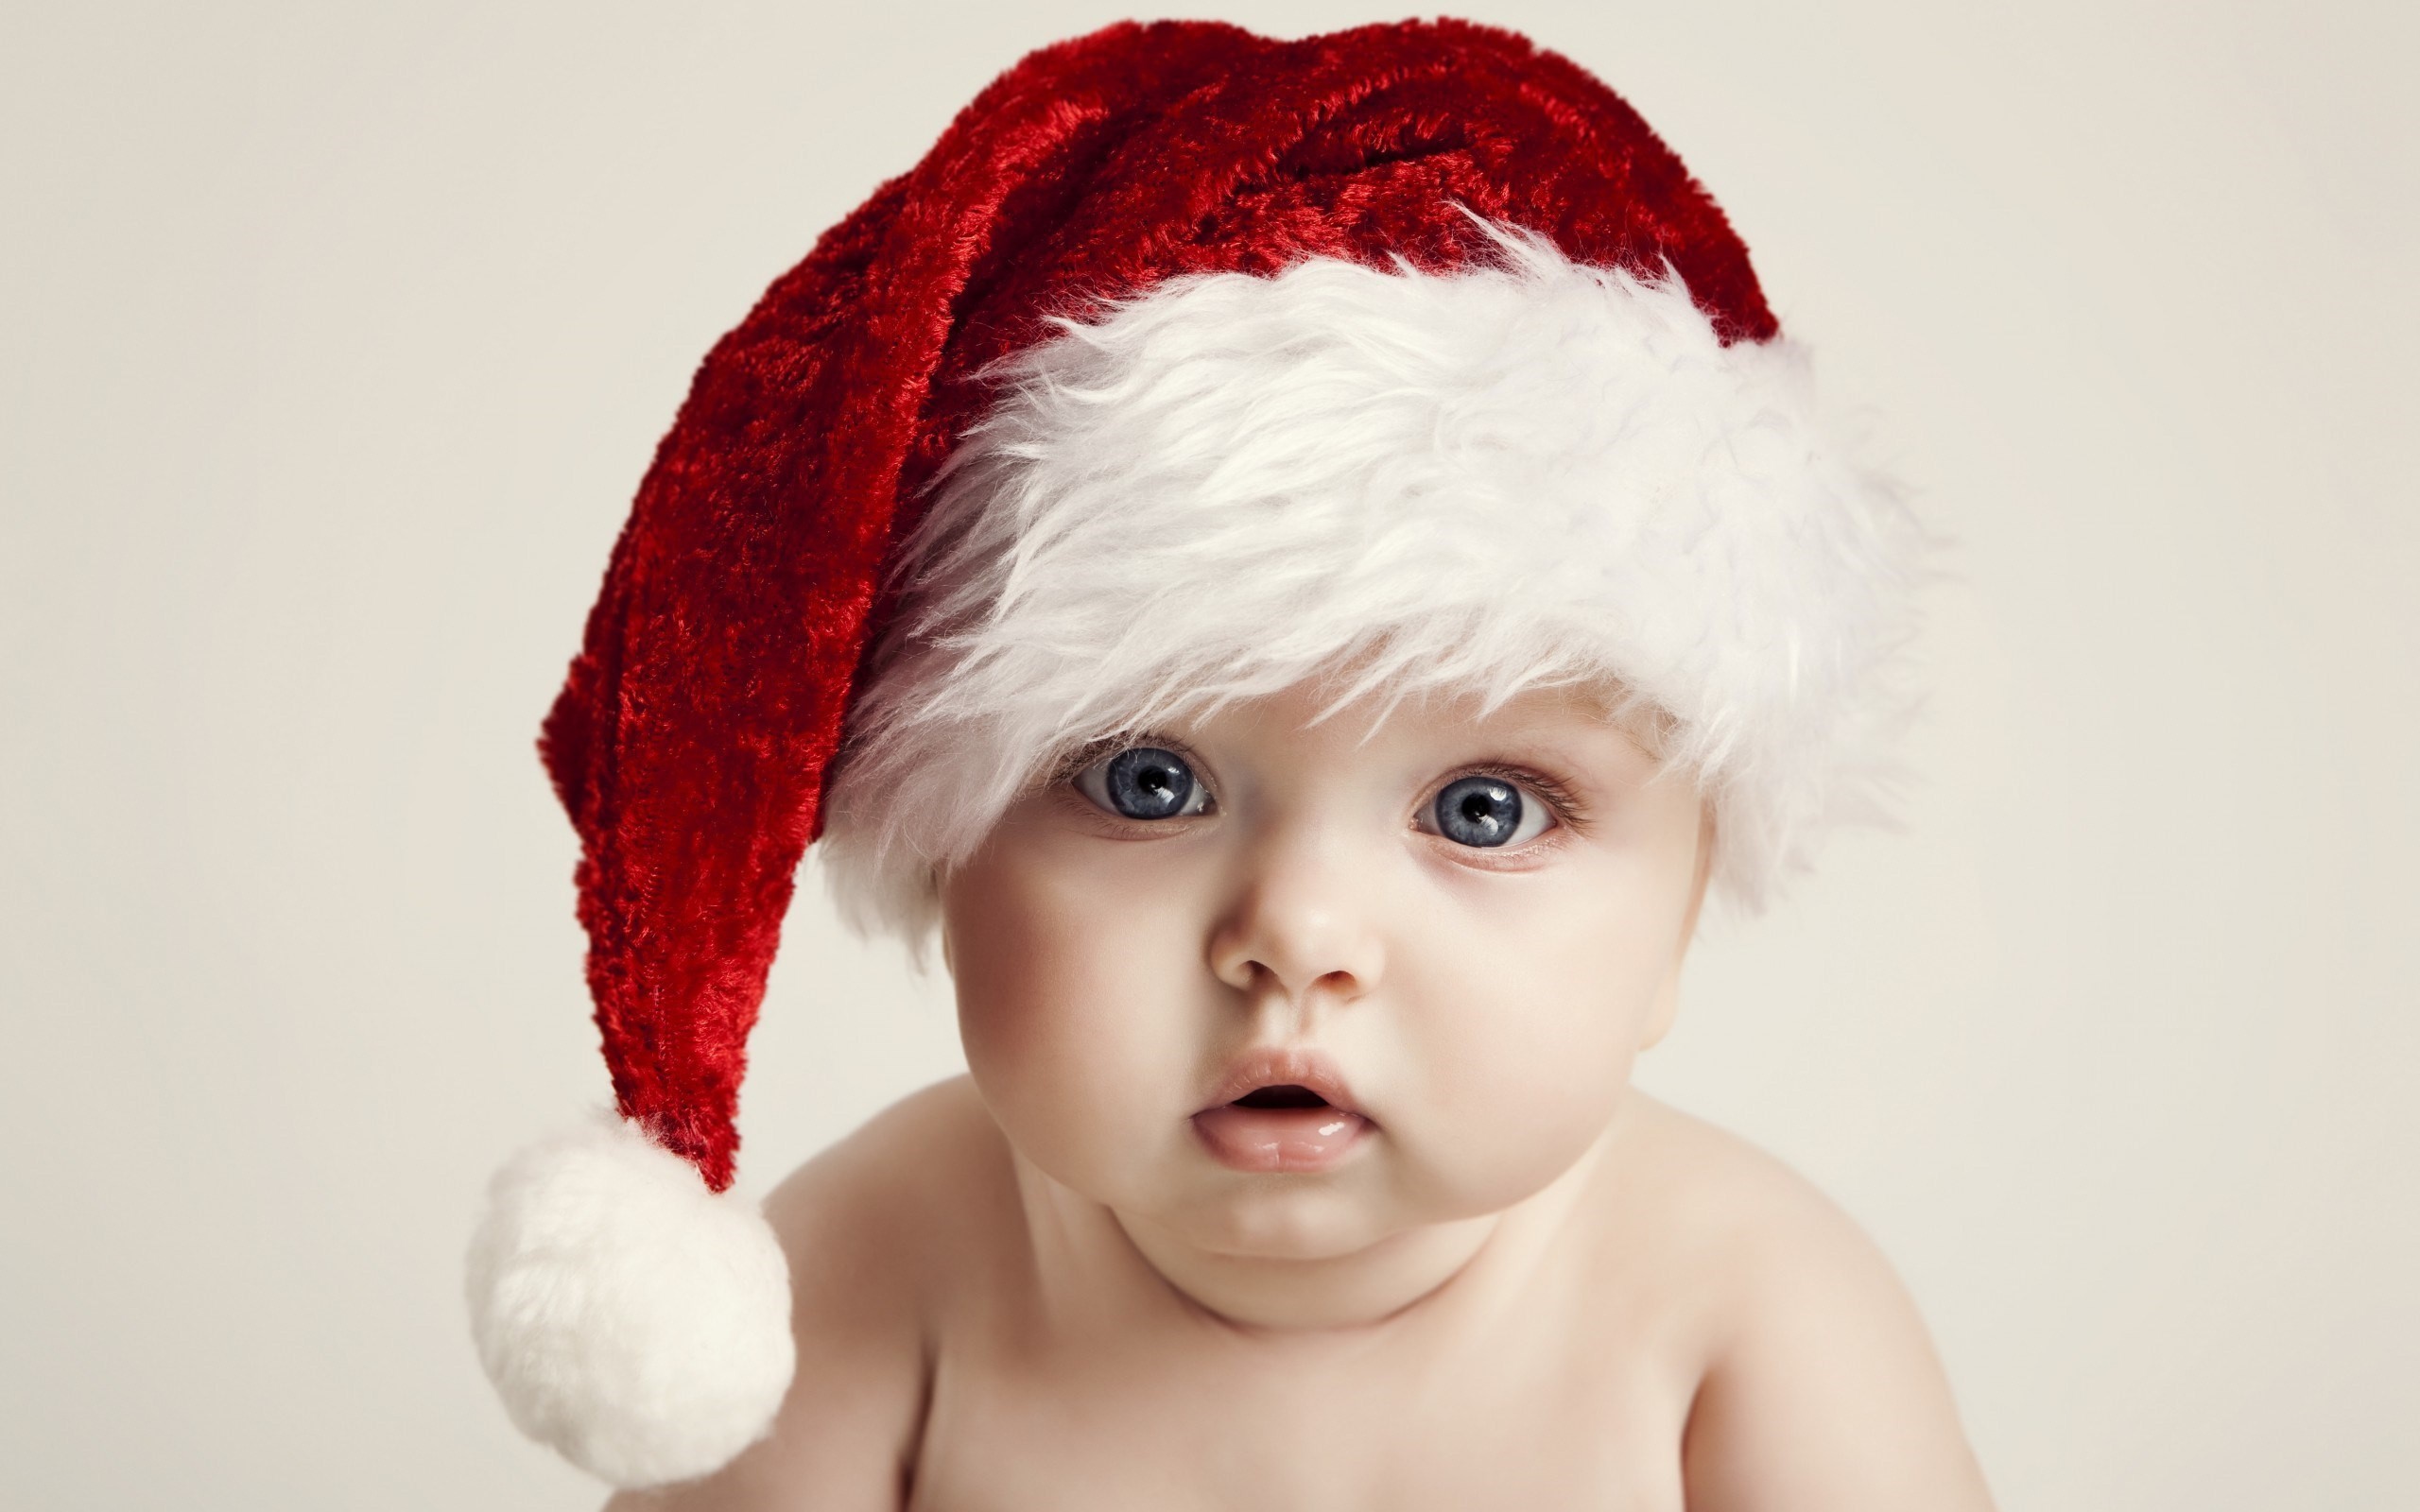 [74+] Cute Baby Boy Pictures Wallpapers on WallpaperSafari